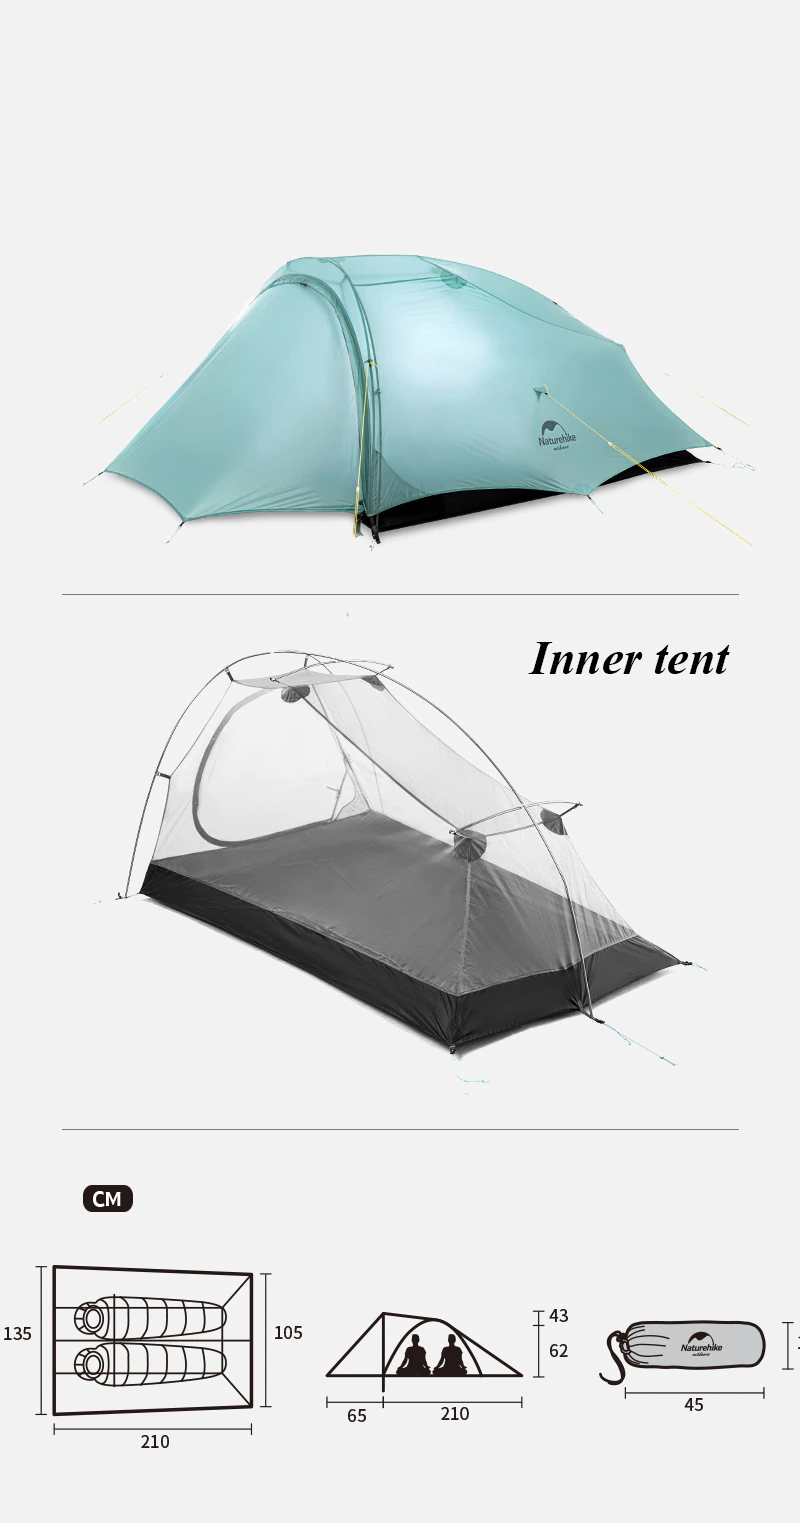 Cheap Goat Tents  New Arrival SHARED 2 Ultralight Outdoor Camping 20D Single Silicone Nylon Waterproof Tent Tents 